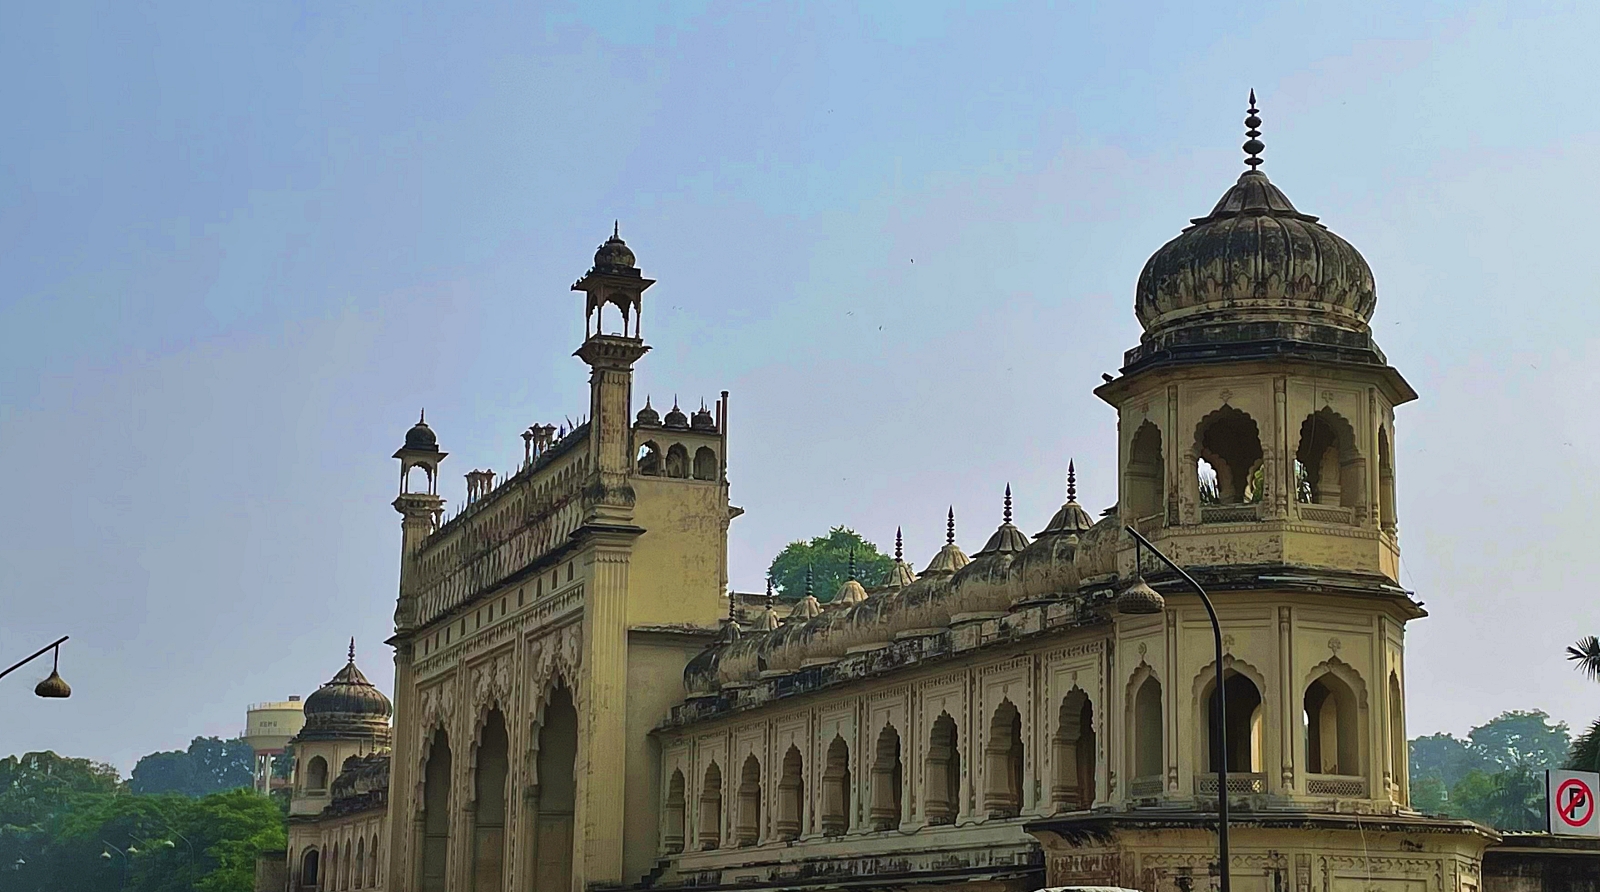 Bara Imambara in Lucknow with a Rice Husk Ash Roof